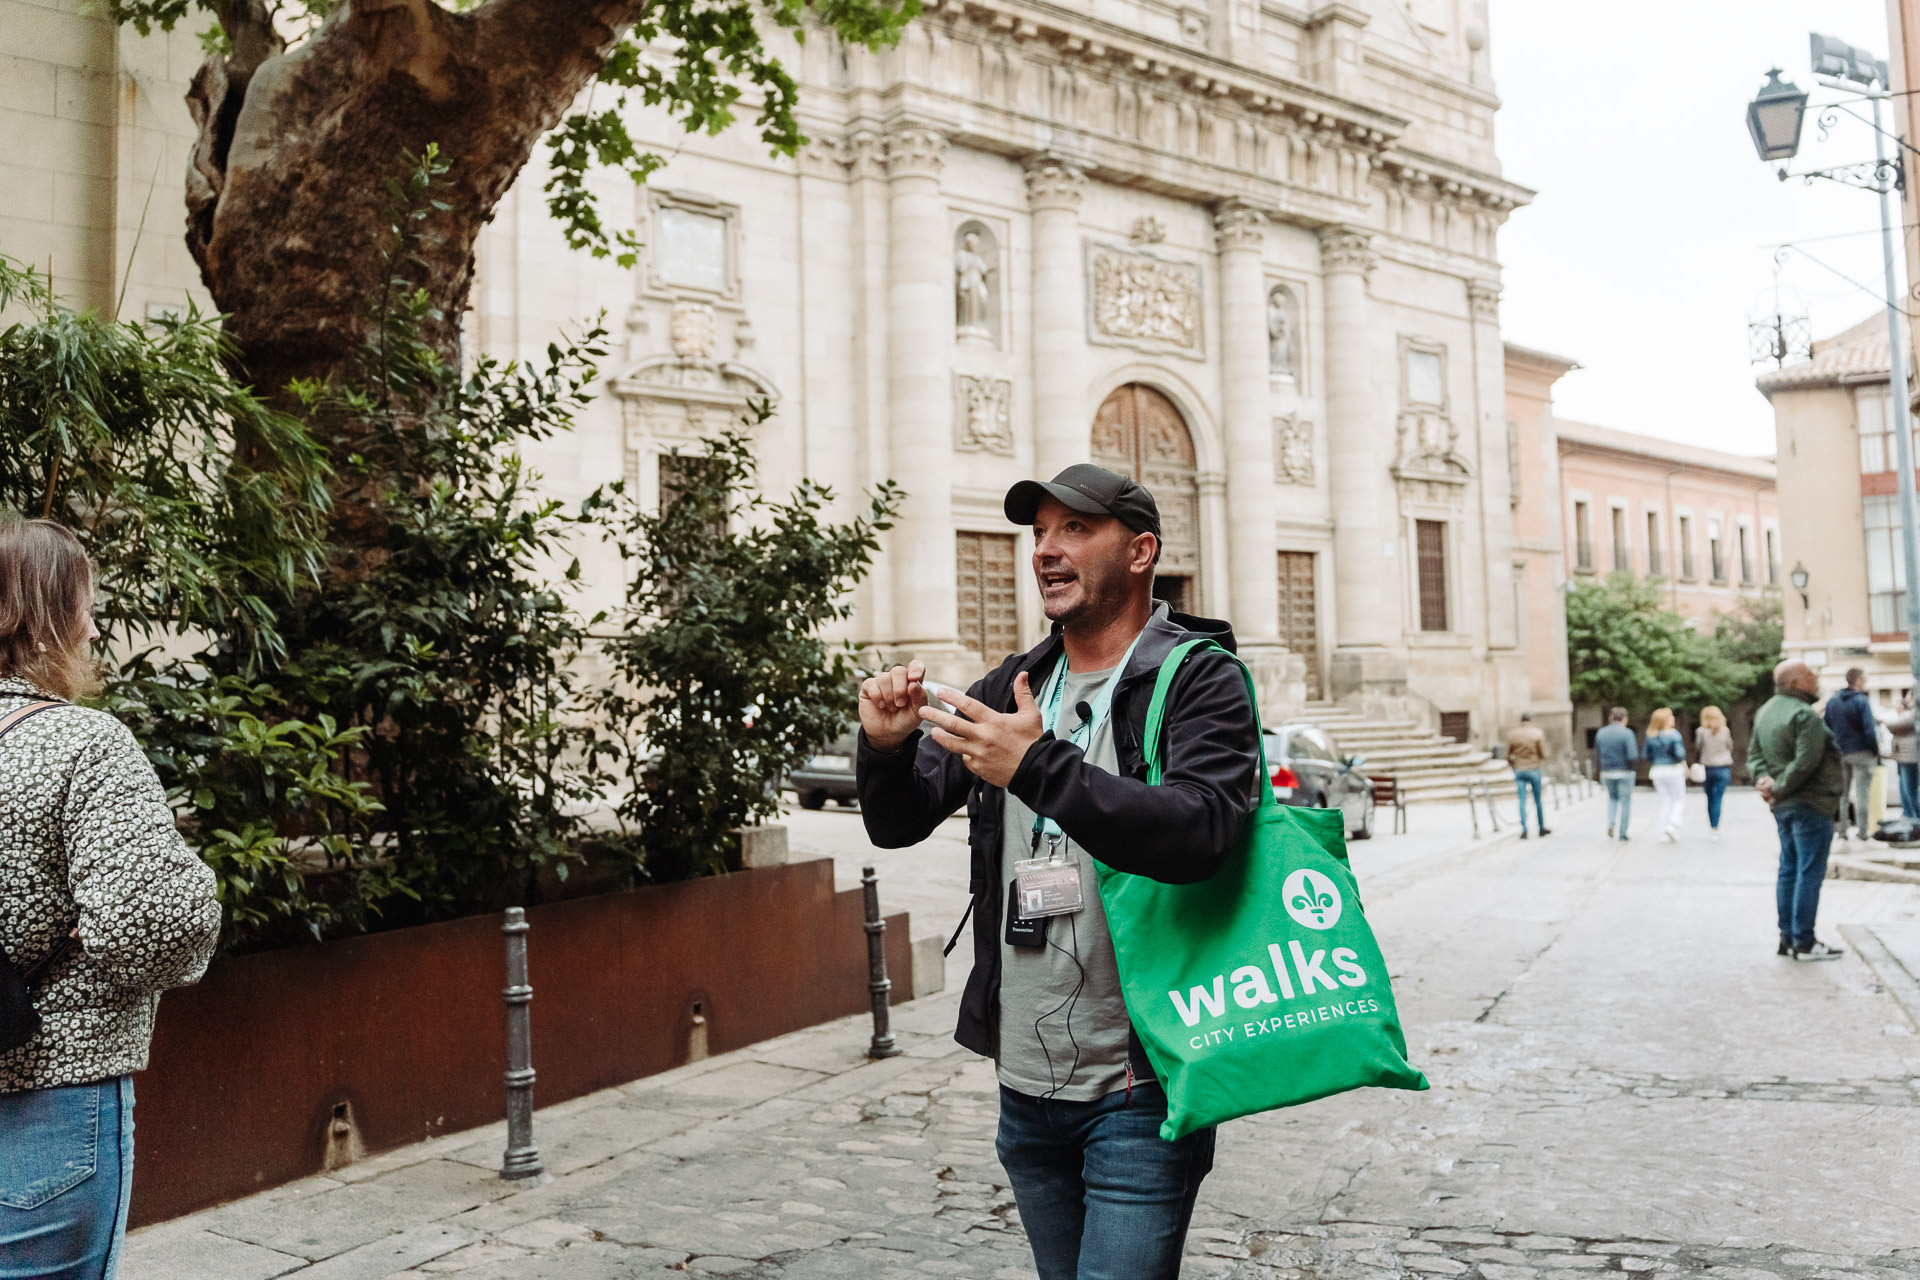 Walks tour guide with green tote bag leads guests through the streets of central Toledo, Spain